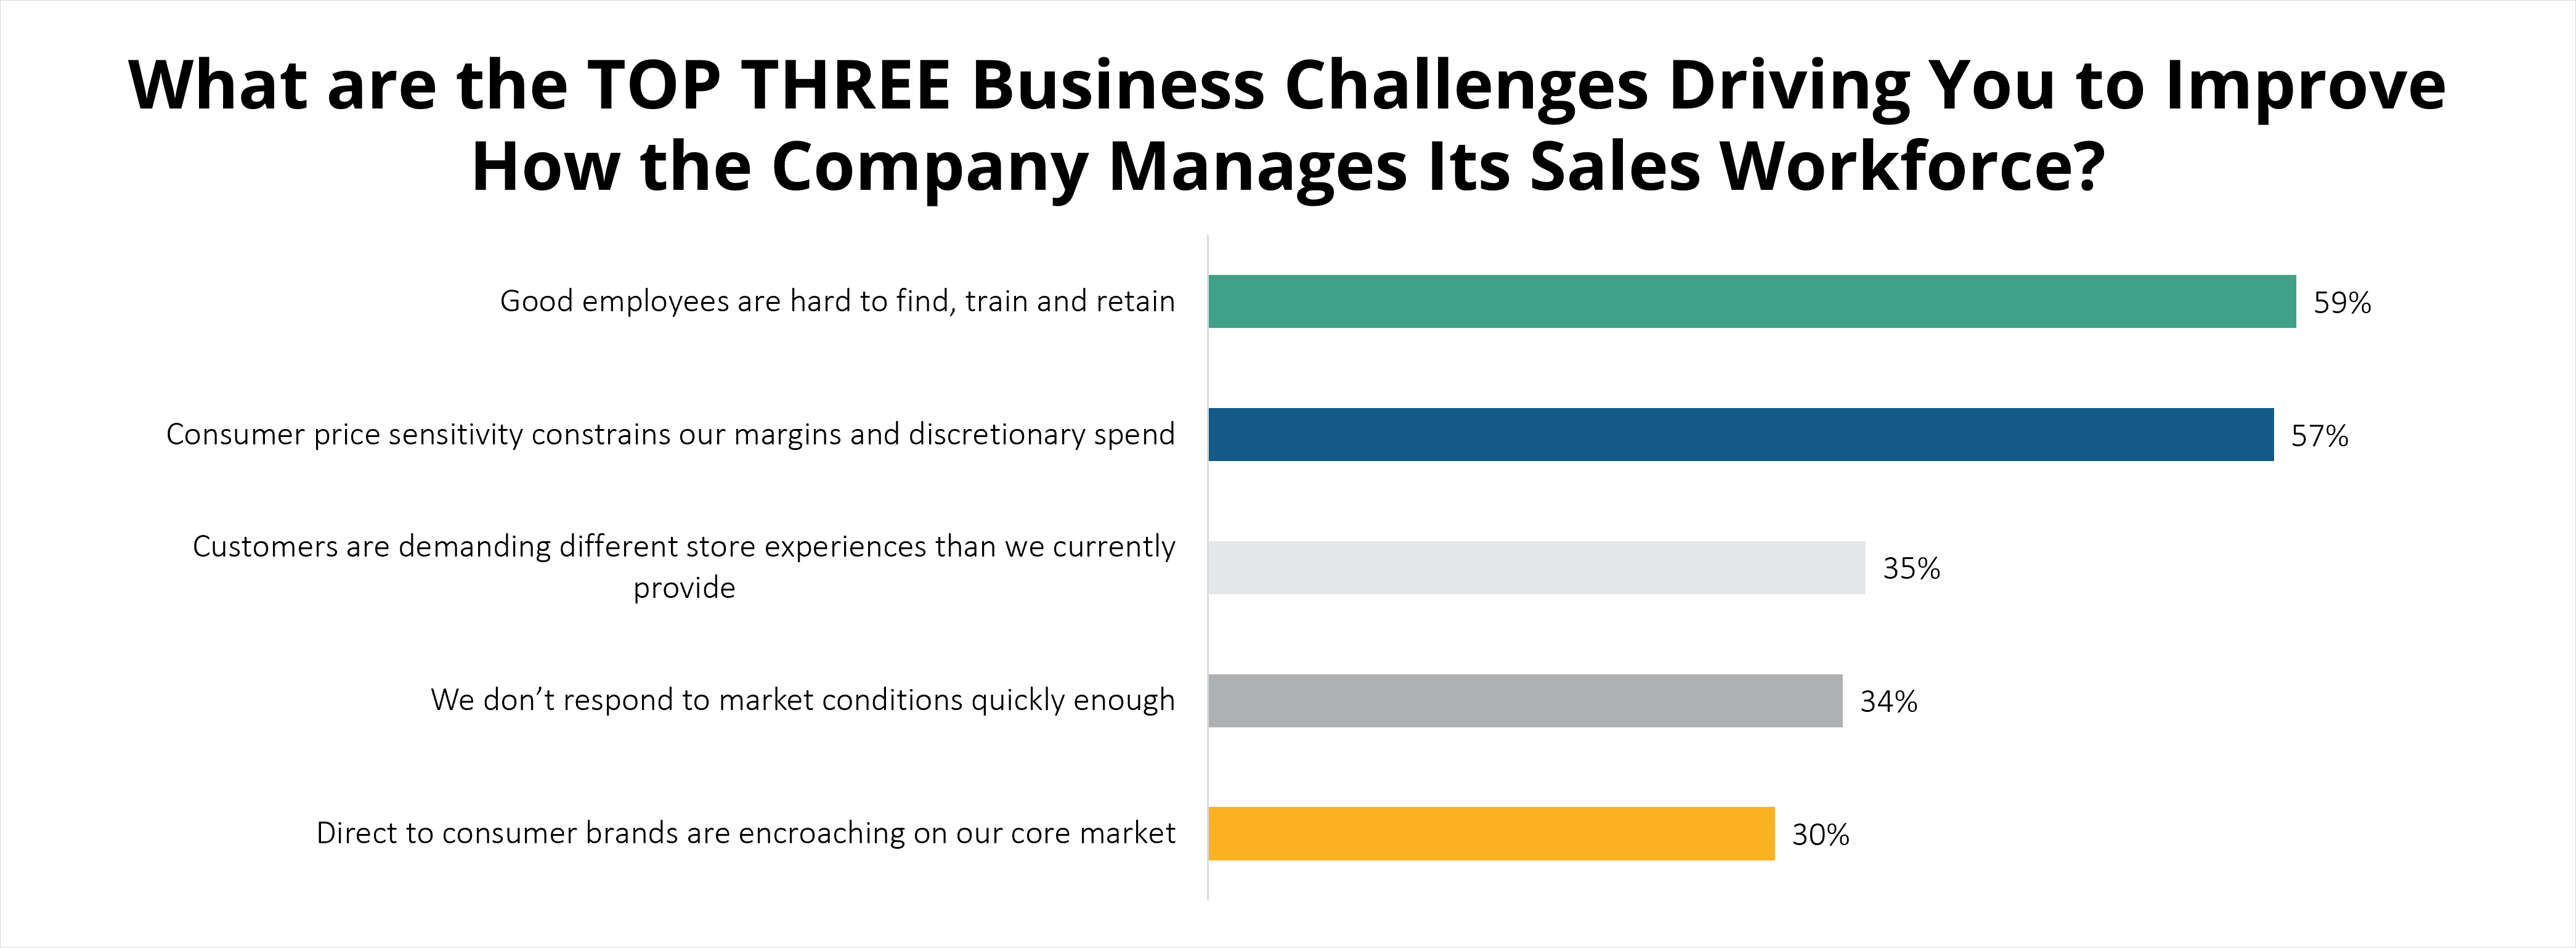 Top three business challenges to improve managing sales workforce